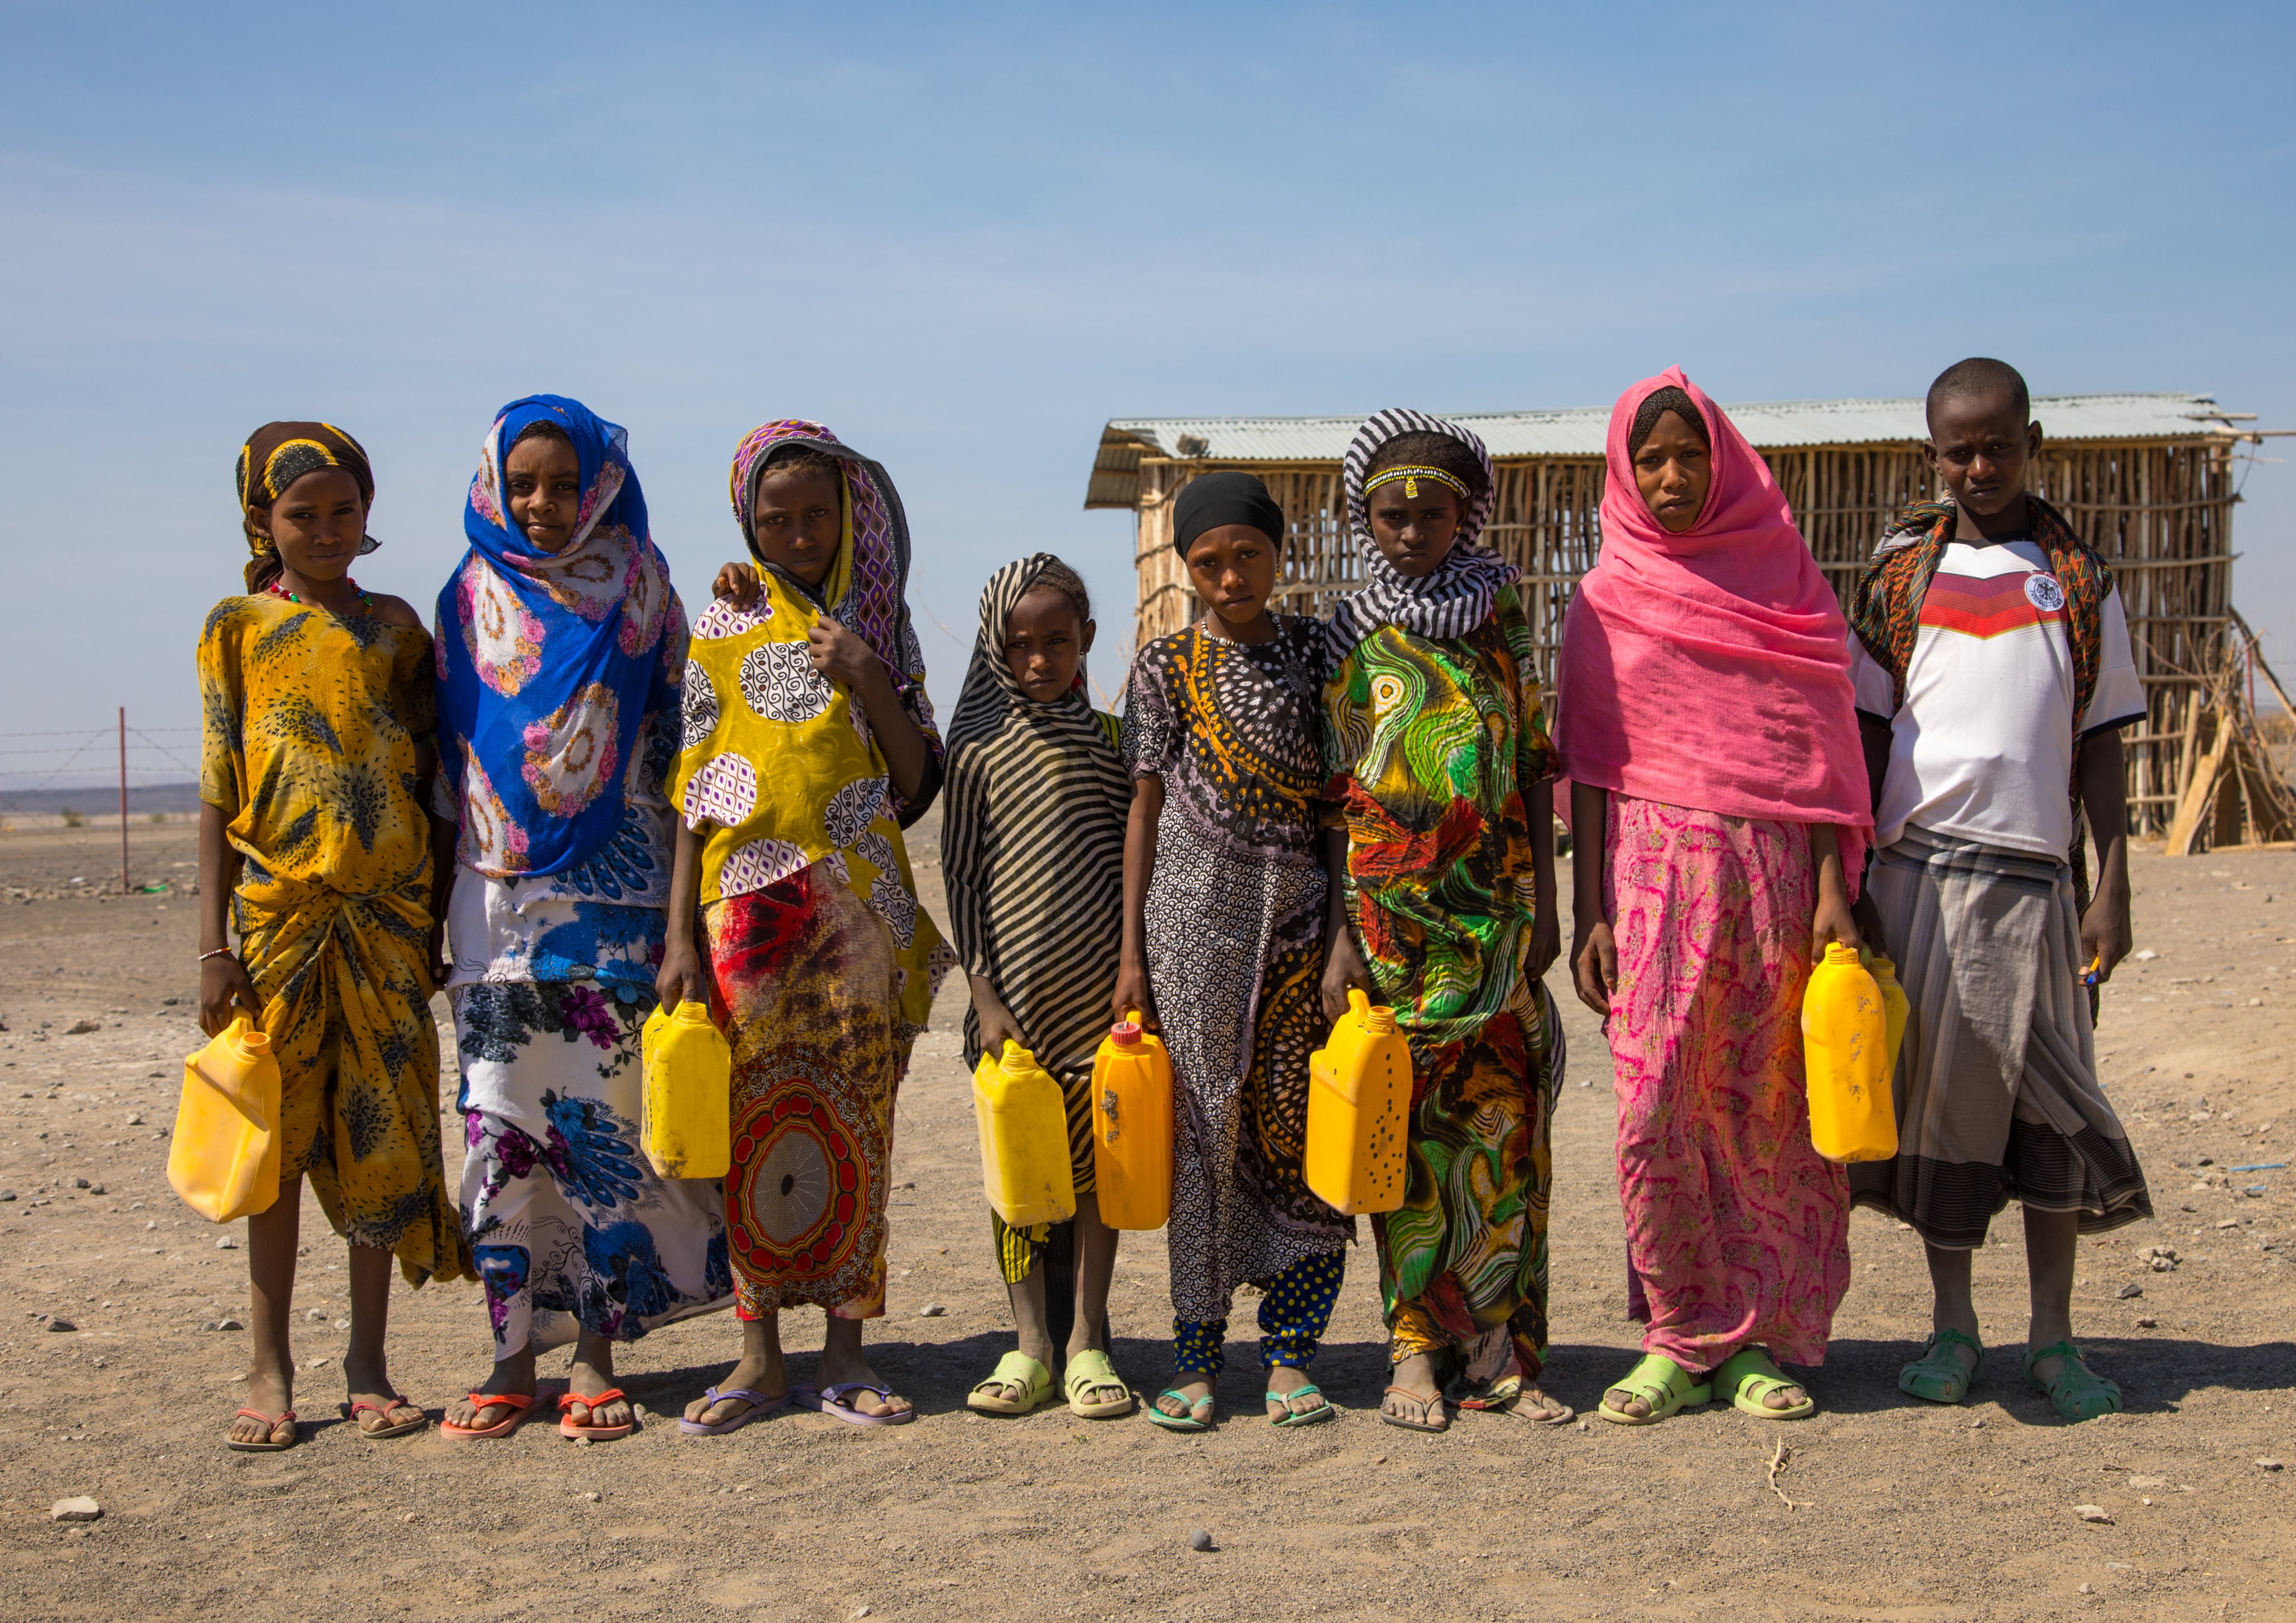 Children collecting water in jericans before going to school, Afar region, Semera, Ethiopia